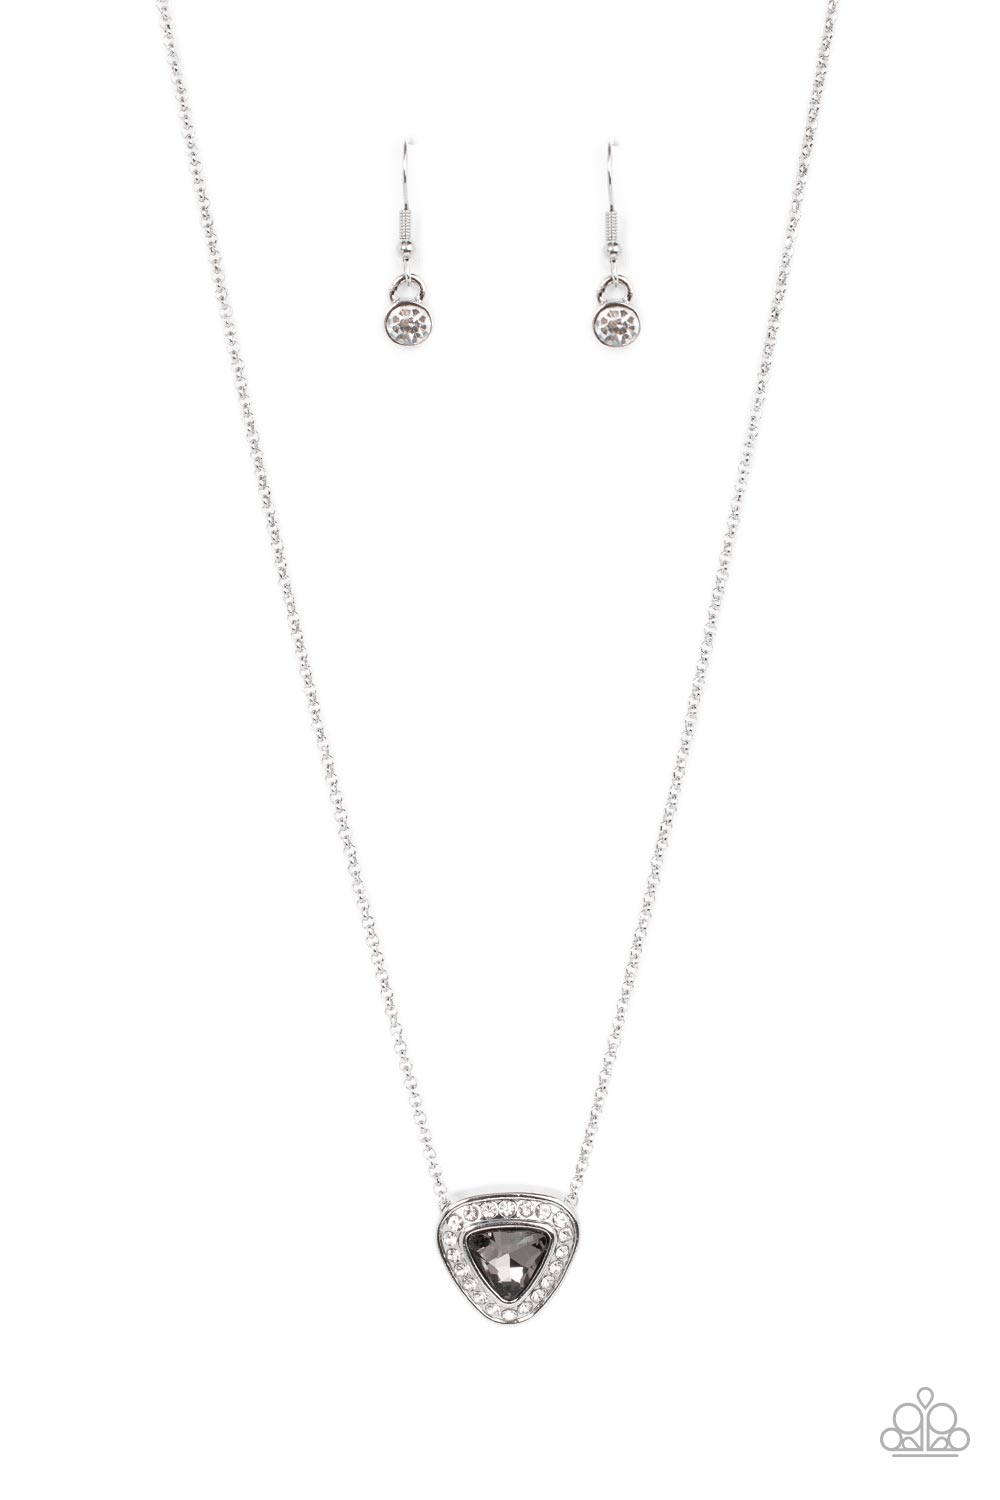 The Whole Package - Silver Gem Necklace - Paparazzi Accessories Bejeweled Accessories By Kristie